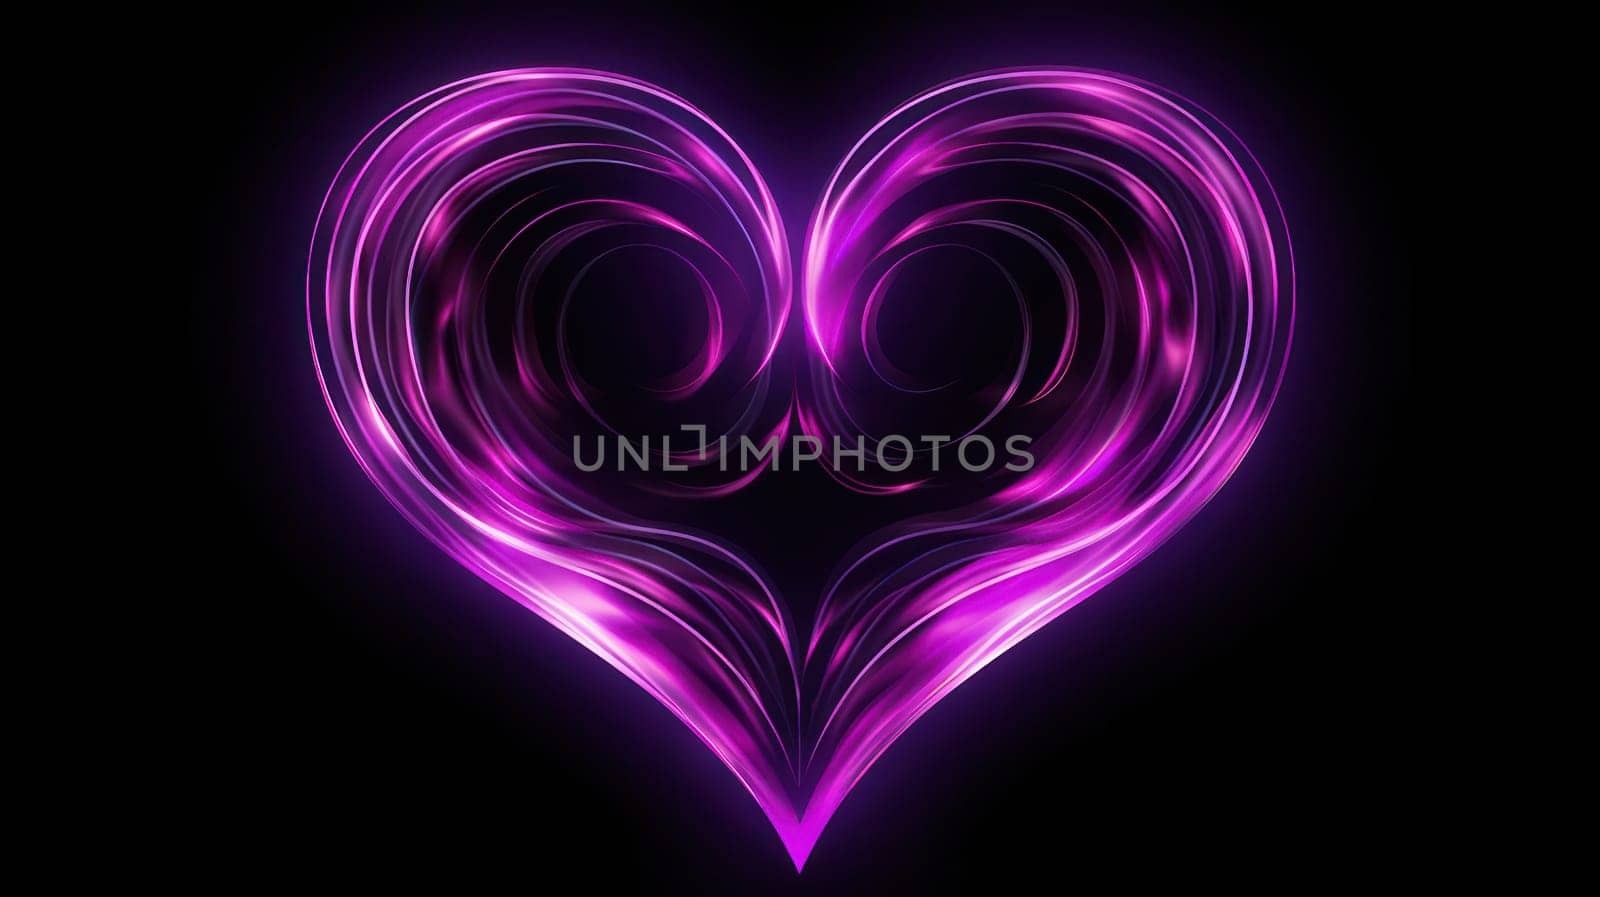 Glowing Love: Abstract Neon Heart on Bright Romantic Background